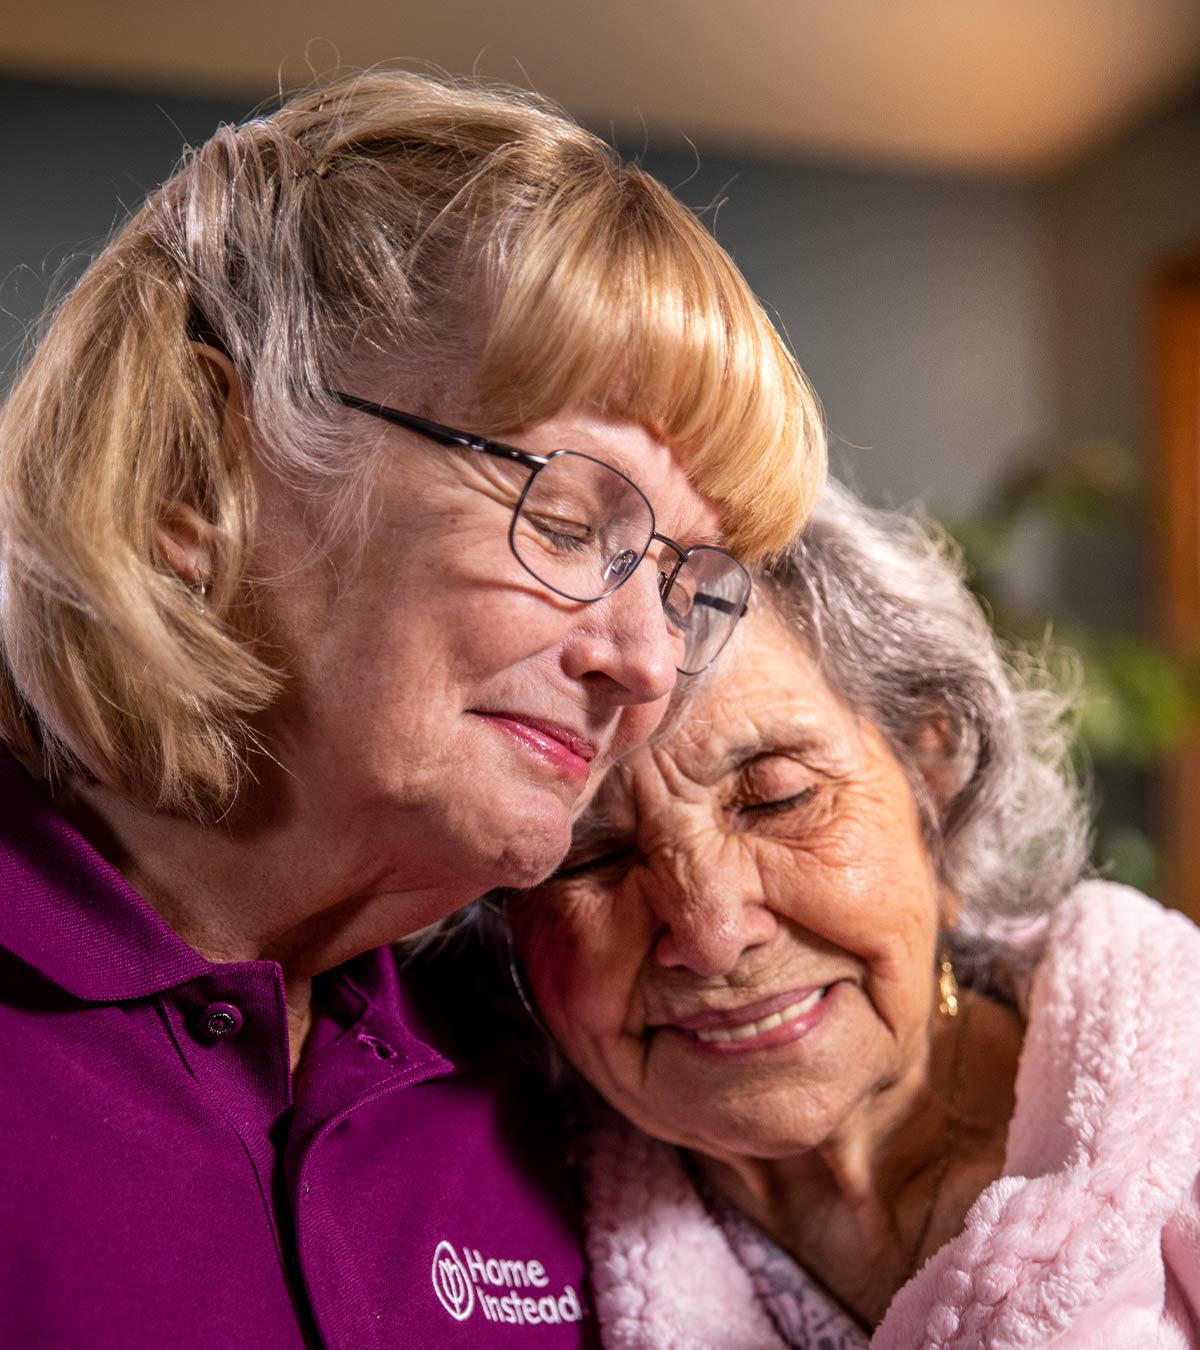 CAREGiver providing in-home senior care services. Home Instead of Ocala, FL provides Elder Care to aging adults. 